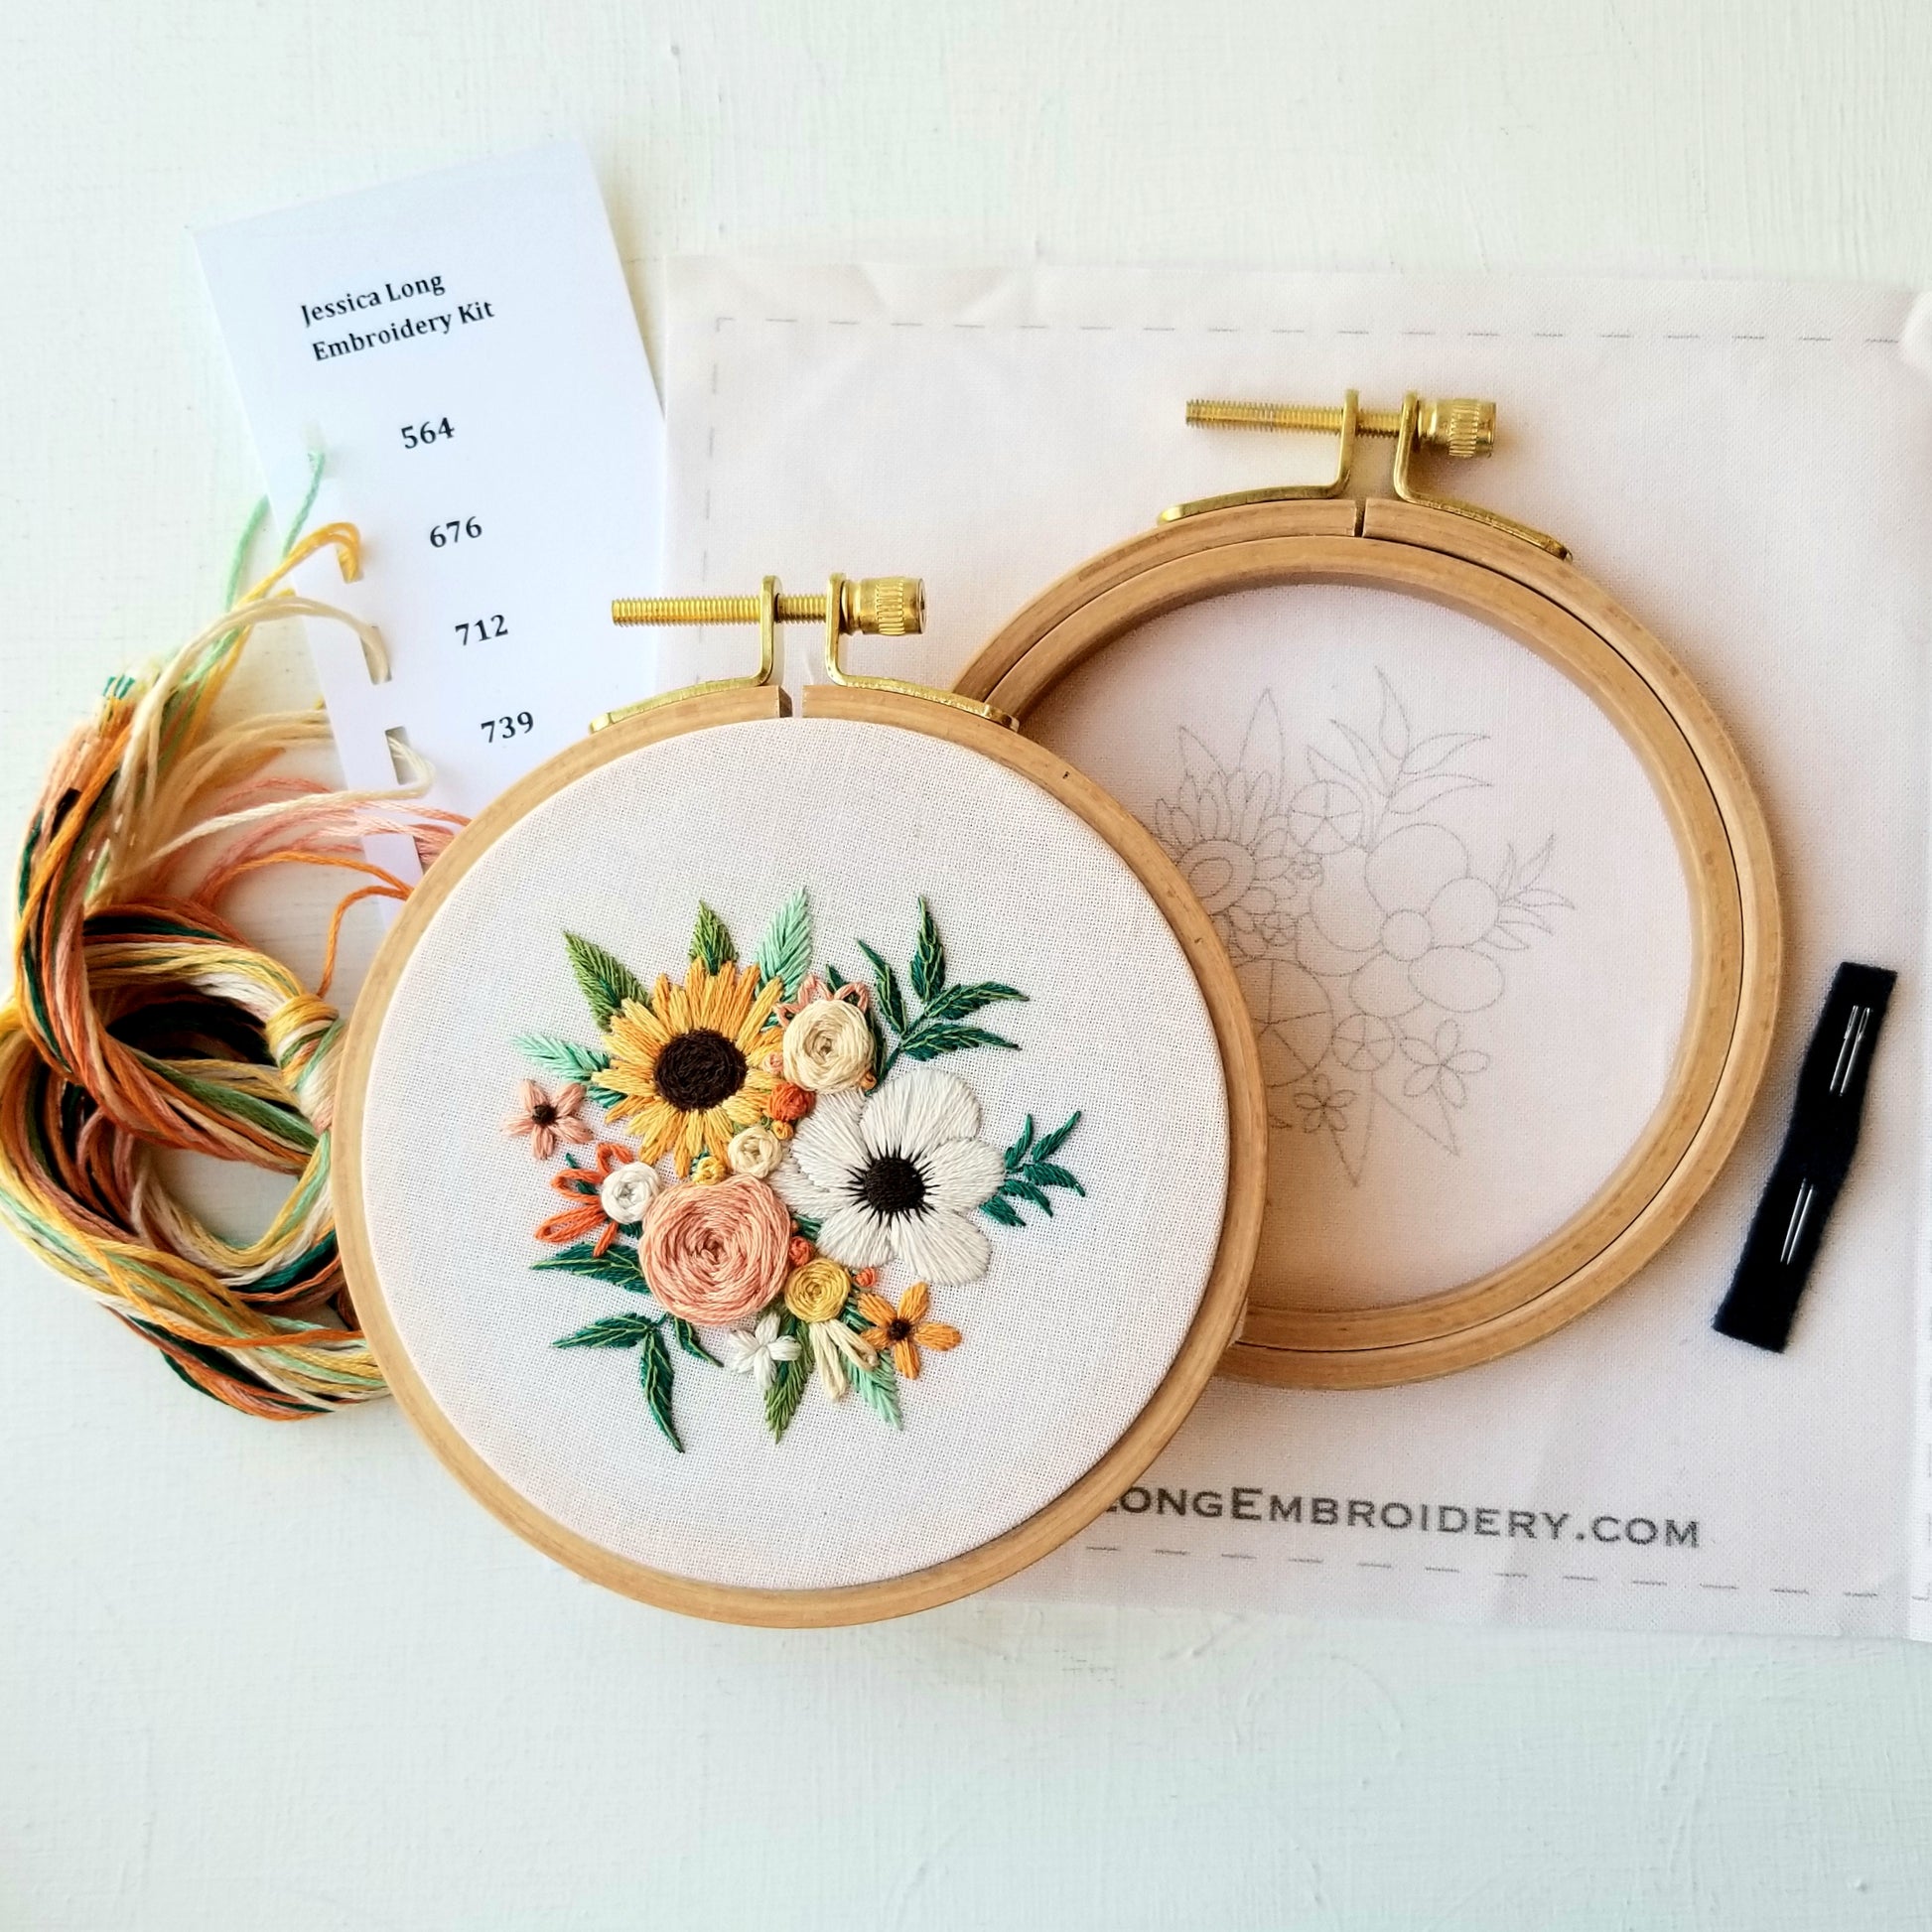 Mini Maker Embroidery Kits: review and tips - Jessie At Home